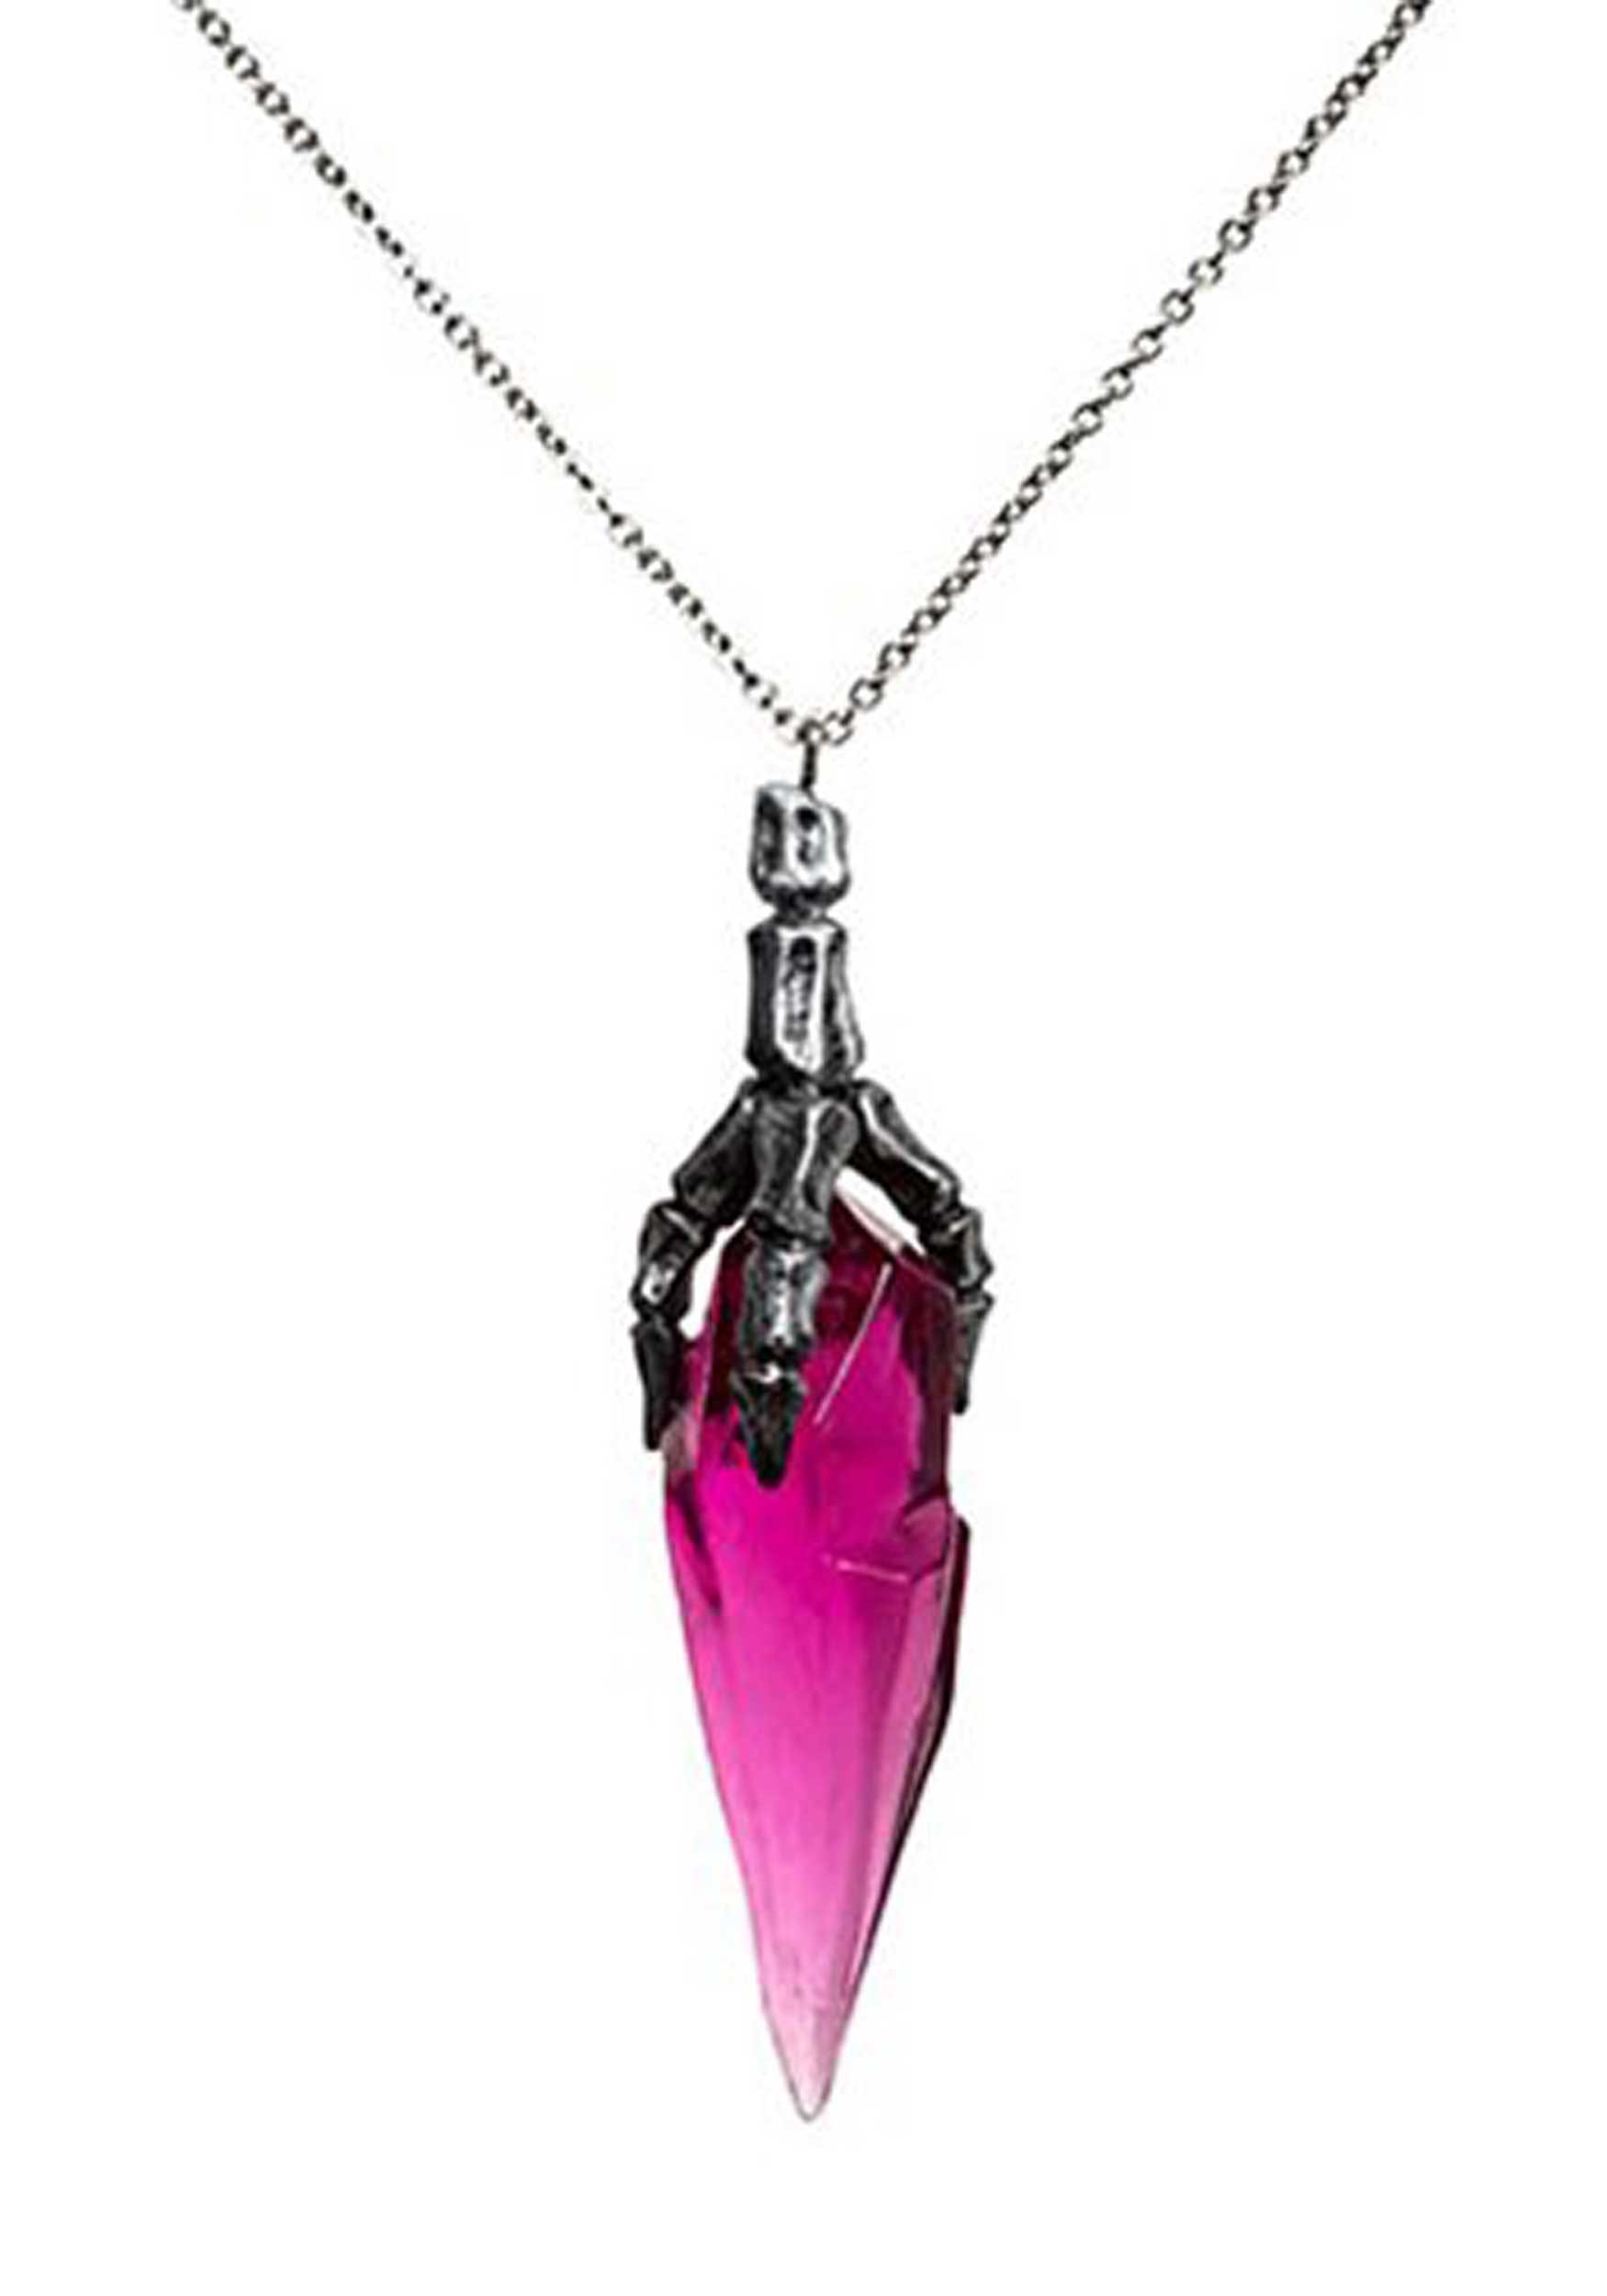 The Age of Resistance Crystal Necklace: The Dark Crystal